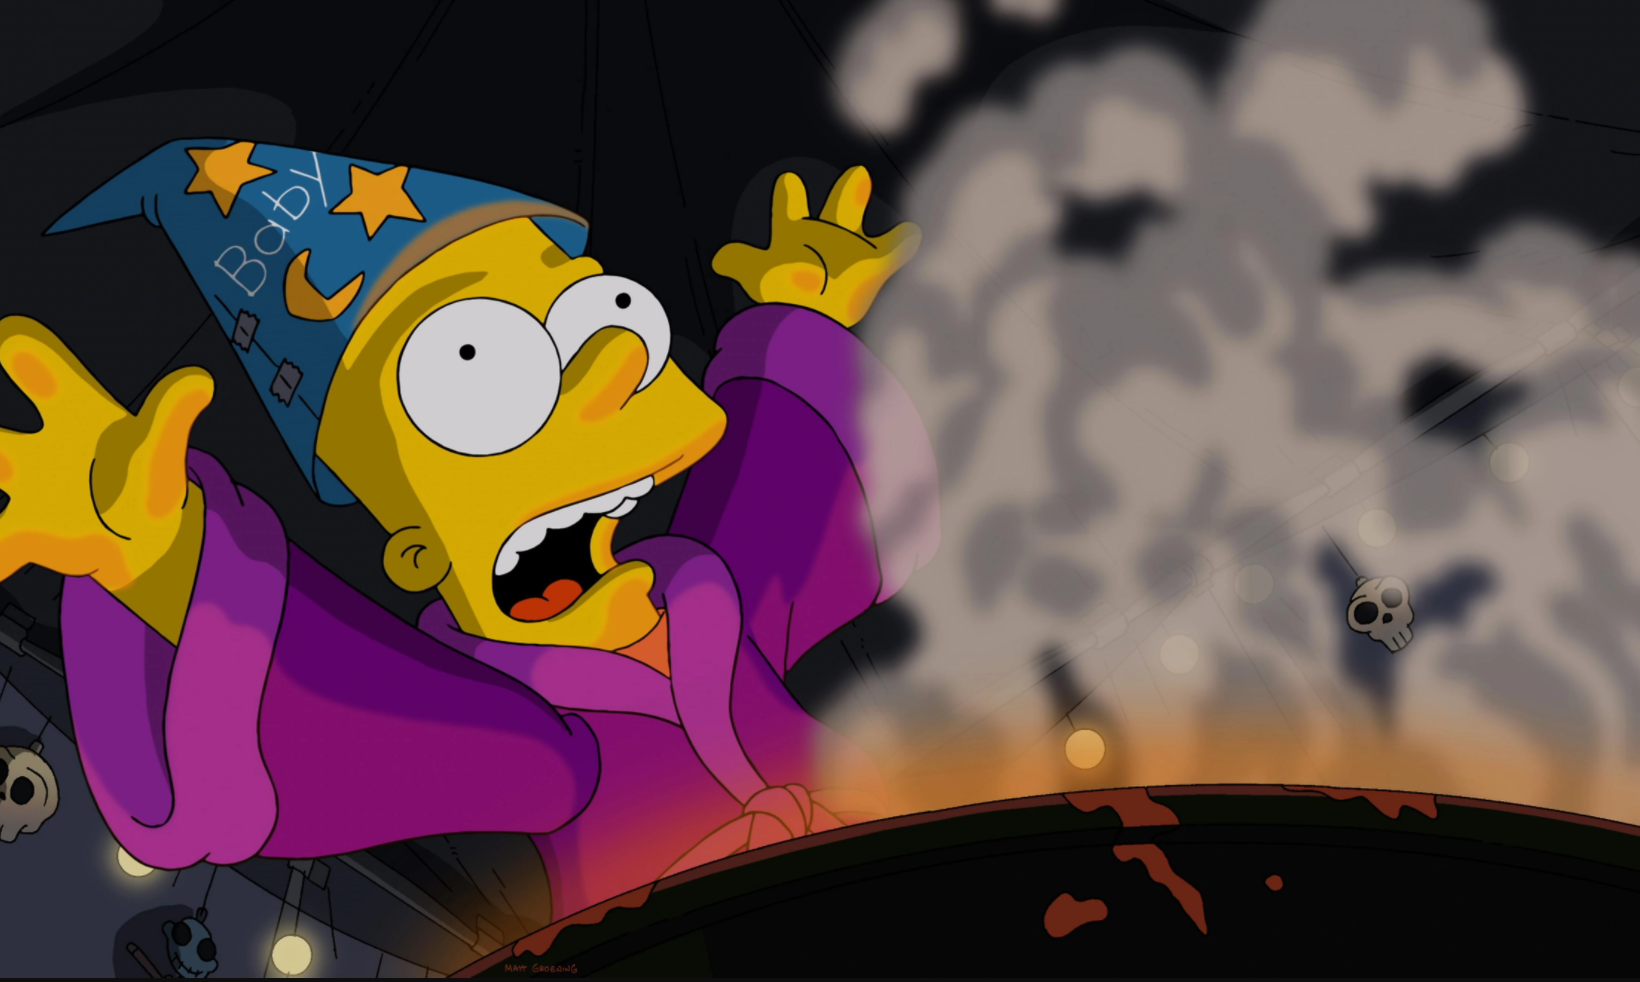 Bart, posing as a baby wizard, stands in front of a cauldron filled with smoke.